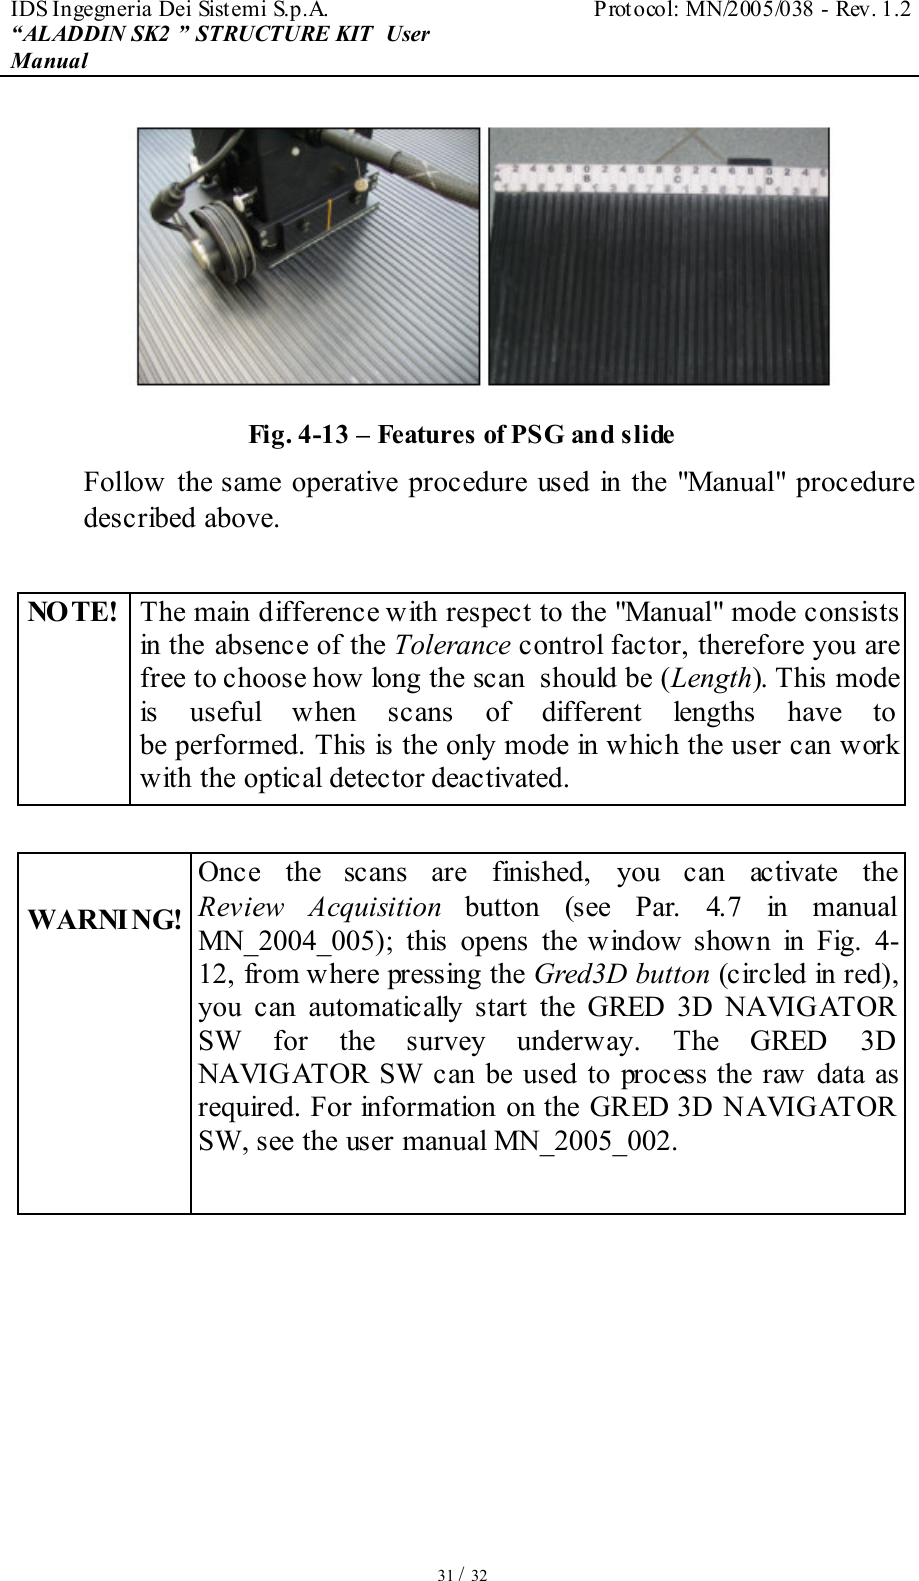 IDS Ingegneria Dei Sistemi S.p.A.  Protocol: MN/2005/038 - Rev. 1.2 “ALADDIN SK2 ” STRUCTURE KIT  User Manual   31 / 32  Fig. 4-13 – Features of PSG and slide Follow the same operative procedure used in  the &quot;Manual&quot;  procedure described above.  NOTE! The main difference with respect to the &quot;Manual&quot; mode consists in the absence of the Tolerance control factor, therefore you are free to choose how long the scan  should be (Length). This mode is  useful  when  scans  of  different  lengths  have  to be performed. This is the only mode in which the user can work with the optical detector deactivated.   WARNI NG! Once  the  scans  are  finished,  you  can  activate  the Review  Acquisition button  (see  Par.  4.7  in  manual MN_2004_005);  this  opens  the window  shown  in  Fig.  4-12, from where pressing the Gred3D button (circled in red), you  can  automatically  start  the  GRED  3D  NAVIGATOR SW  for  the  survey  underway.  The  GRED  3D NAVIGATOR  SW can be used to process the raw data as required. For information on the GRED 3D NAVIGATOR SW, see the user manual MN_2005_002.   